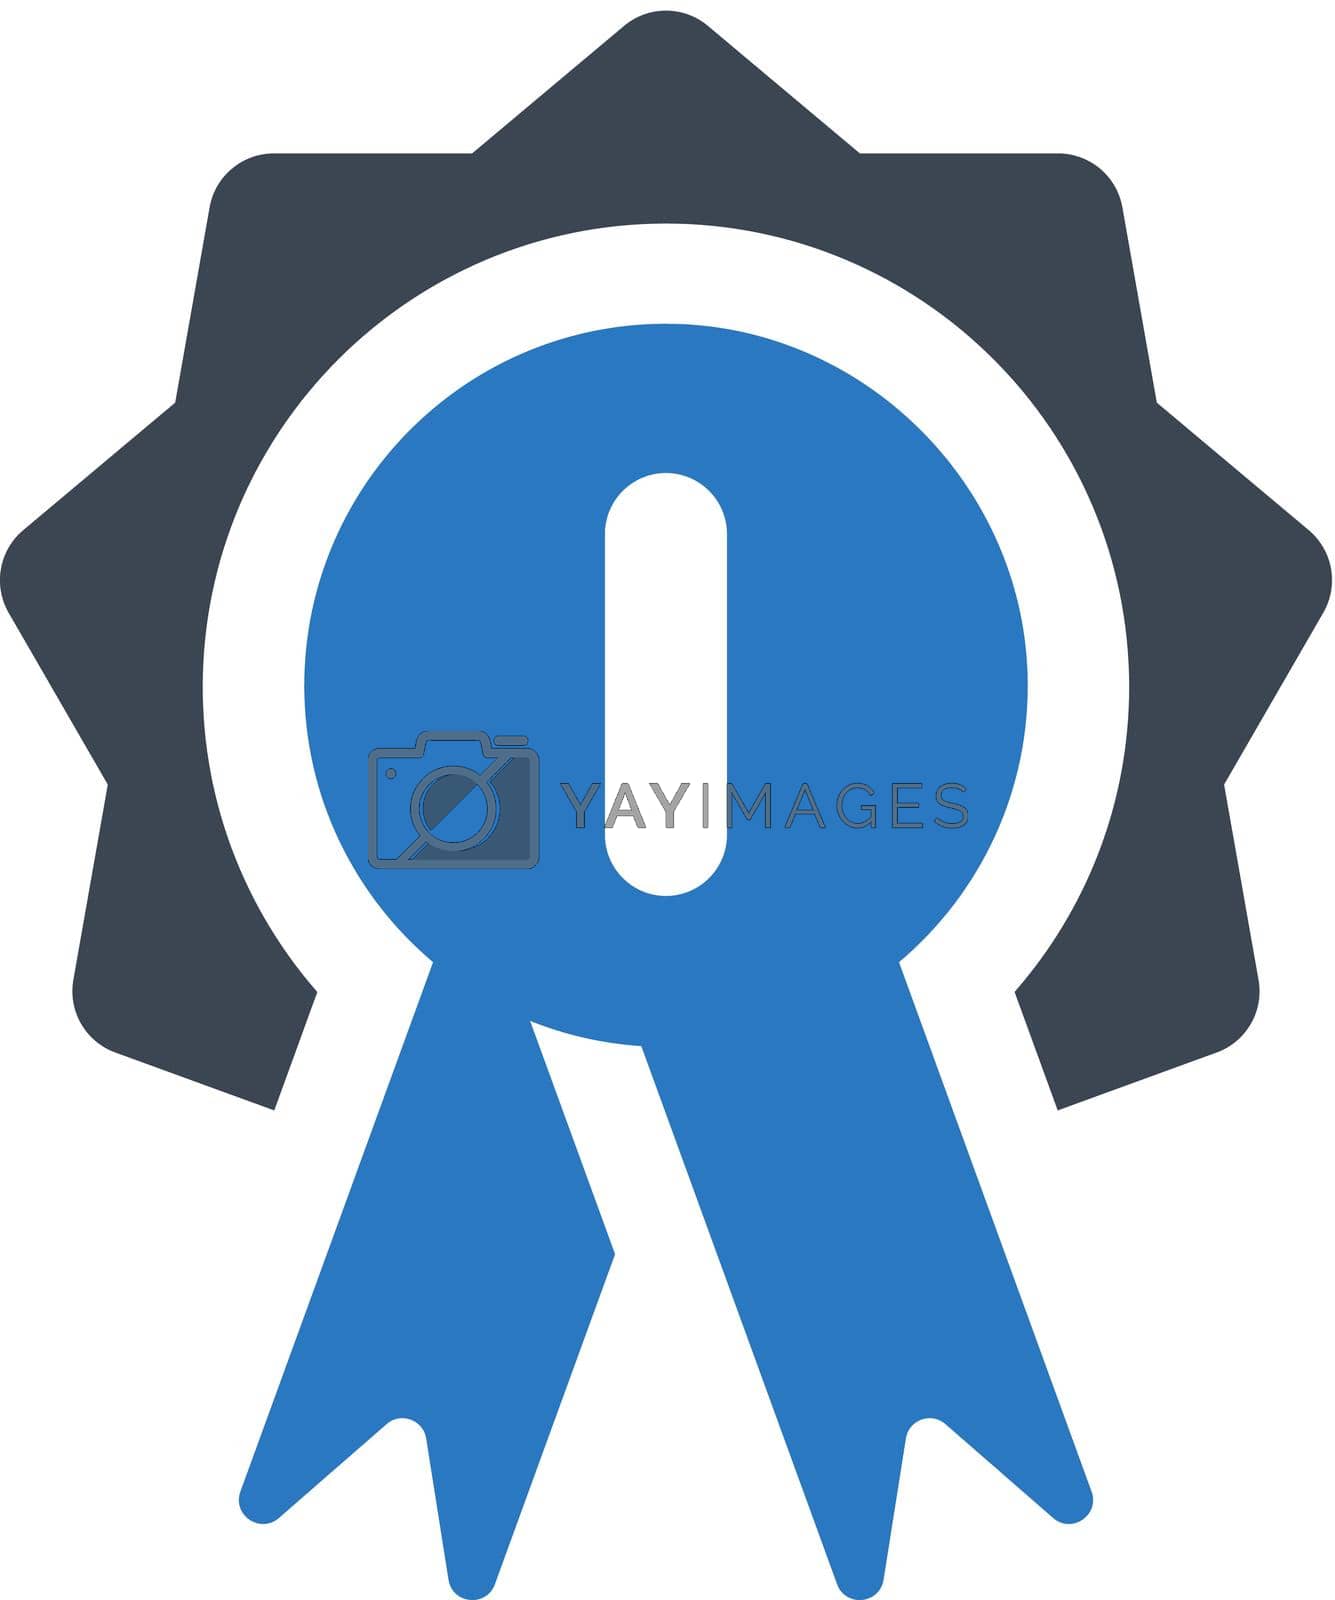 Royalty free image of First place badge icon by delwar018